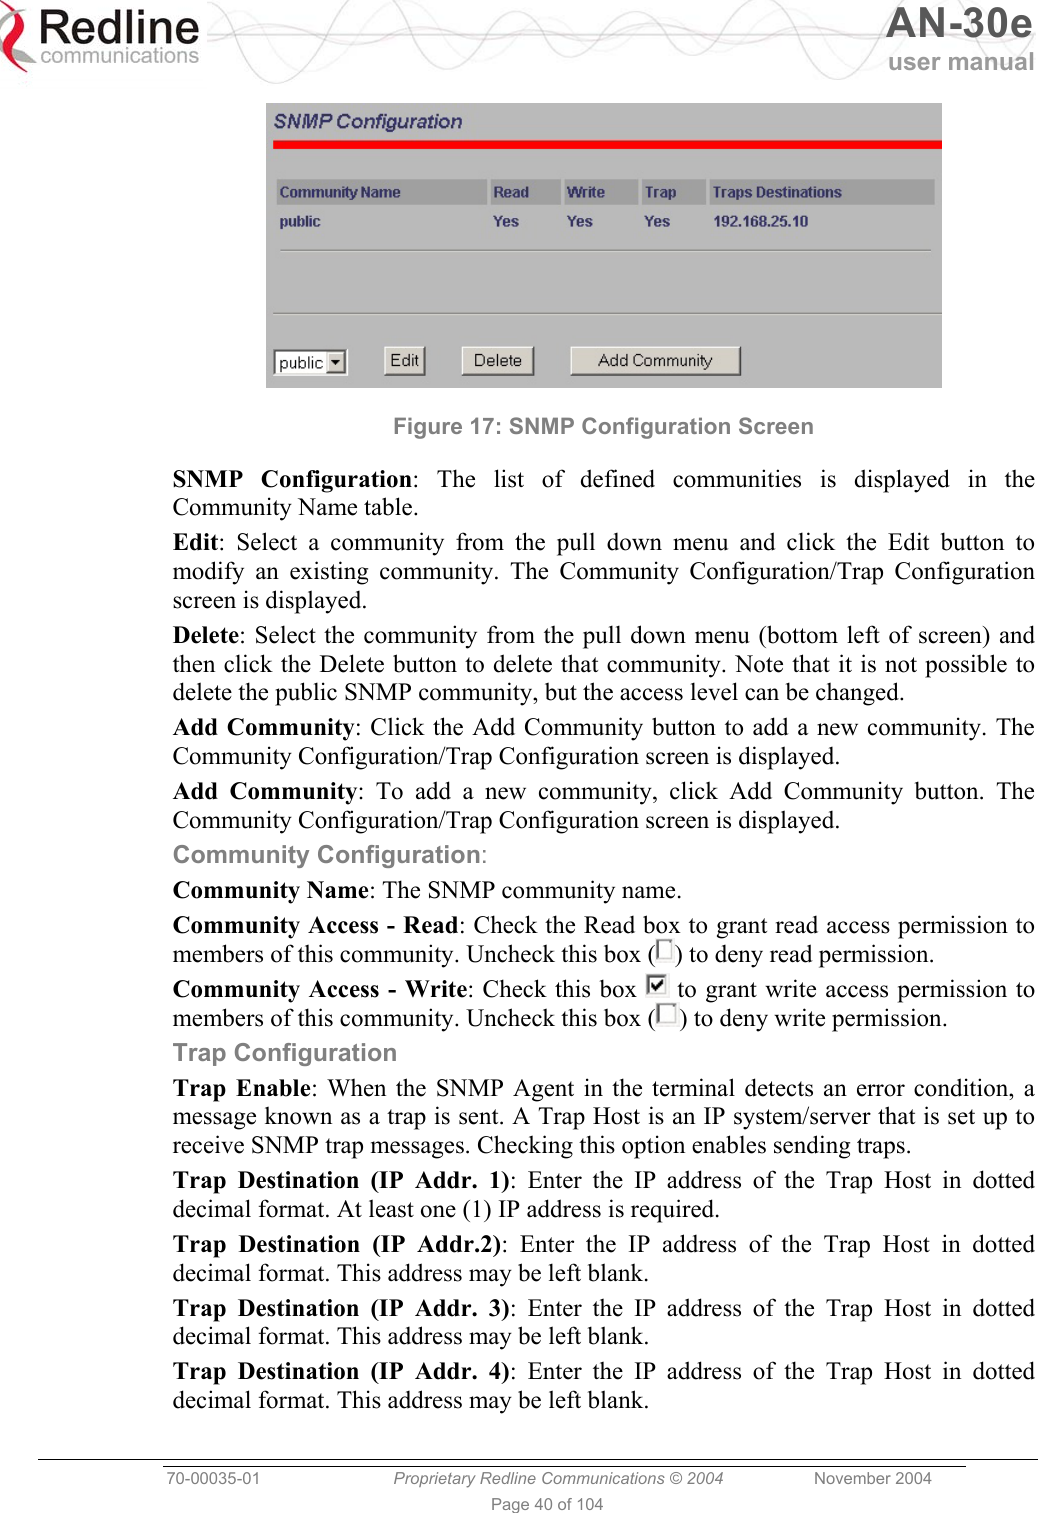   AN-30e user manual  70-00035-01  Proprietary Redline Communications © 2004 November 2004   Page 40 of 104  Figure 17: SNMP Configuration Screen  SNMP Configuration: The list of defined communities is displayed in the Community Name table. Edit: Select a community from the pull down menu and click the Edit button to modify an existing community. The Community Configuration/Trap Configuration screen is displayed. Delete: Select the community from the pull down menu (bottom left of screen) and then click the Delete button to delete that community. Note that it is not possible to delete the public SNMP community, but the access level can be changed. Add Community: Click the Add Community button to add a new community. The Community Configuration/Trap Configuration screen is displayed. Add Community: To add a new community, click Add Community button. The Community Configuration/Trap Configuration screen is displayed. Community Configuration: Community Name: The SNMP community name.  Community Access - Read: Check the Read box to grant read access permission to members of this community. Uncheck this box ( ) to deny read permission. Community Access - Write: Check this box   to grant write access permission to members of this community. Uncheck this box ( ) to deny write permission. Trap Configuration Trap Enable: When the SNMP Agent in the terminal detects an error condition, a message known as a trap is sent. A Trap Host is an IP system/server that is set up to receive SNMP trap messages. Checking this option enables sending traps. Trap Destination (IP Addr. 1): Enter the IP address of the Trap Host in dotted decimal format. At least one (1) IP address is required. Trap Destination (IP Addr.2): Enter the IP address of the Trap Host in dotted decimal format. This address may be left blank. Trap Destination (IP Addr. 3): Enter the IP address of the Trap Host in dotted decimal format. This address may be left blank. Trap Destination (IP Addr. 4): Enter the IP address of the Trap Host in dotted decimal format. This address may be left blank. 